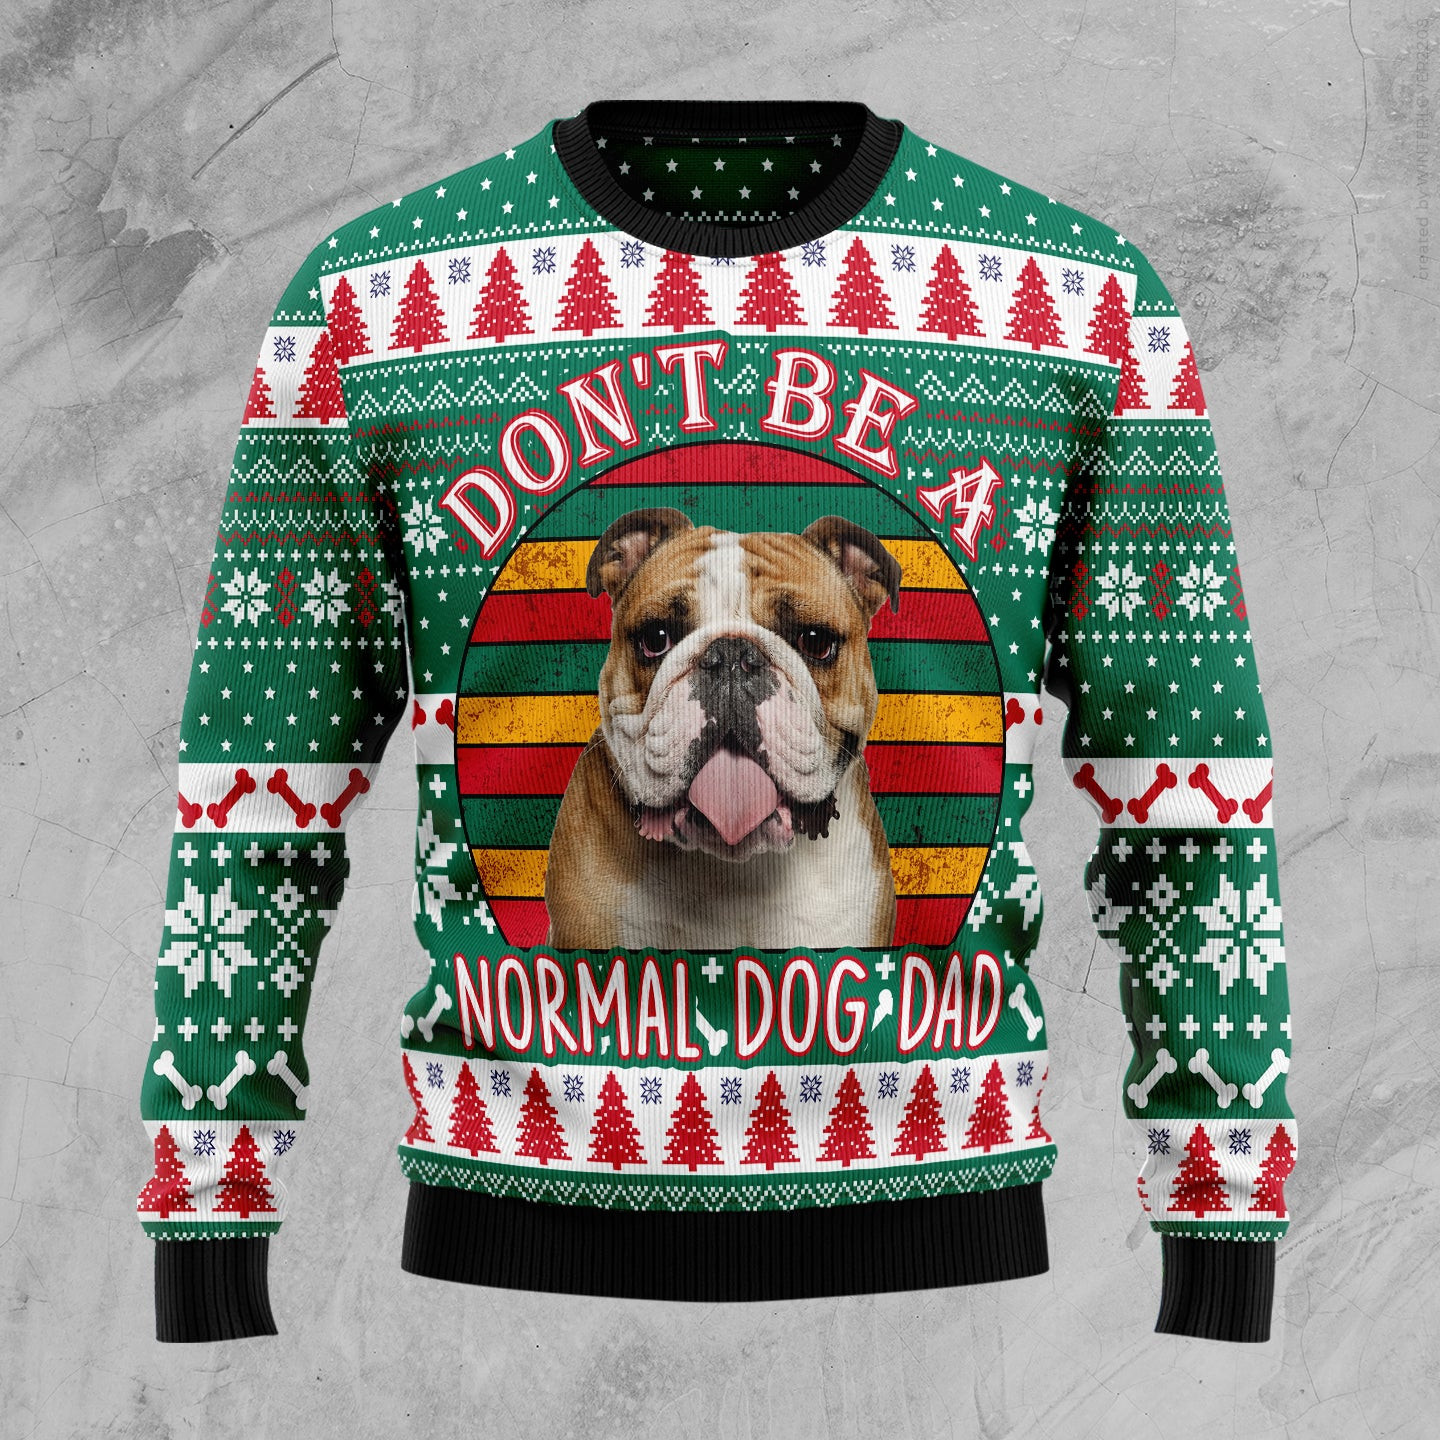 Bulldog Dog Dad Ugly Christmas Sweater, Ugly Sweater For Men Women, Holiday Sweater